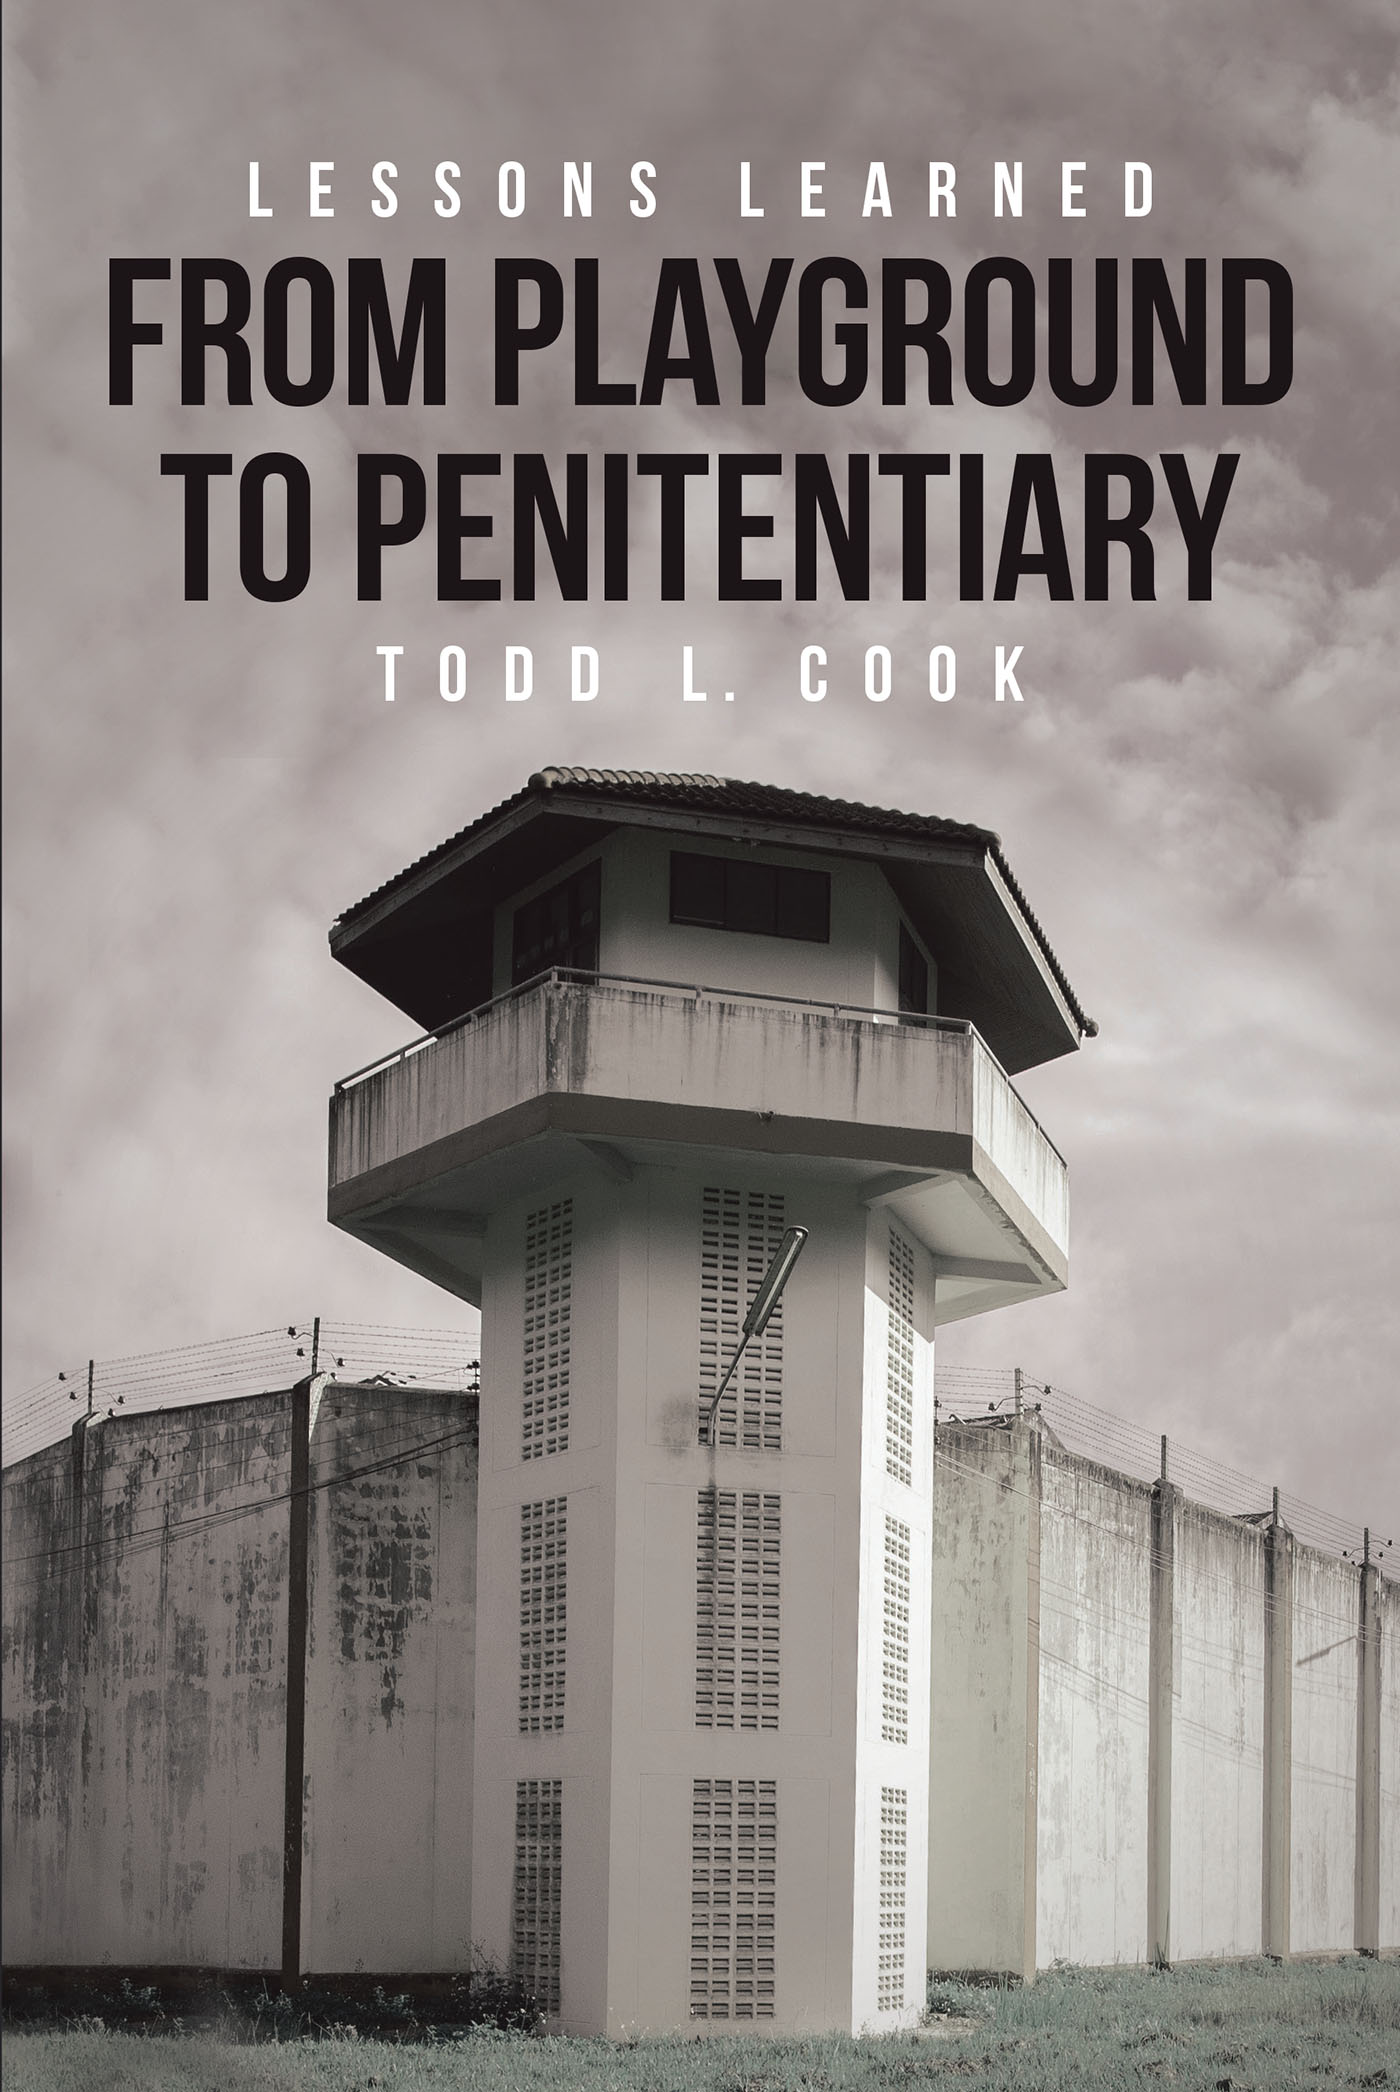 Author Todd L. Cook’s New Book, “Lessons Learned: From Playground to Penitentiary,” is About One Man’s Empowering Journey of Transformation